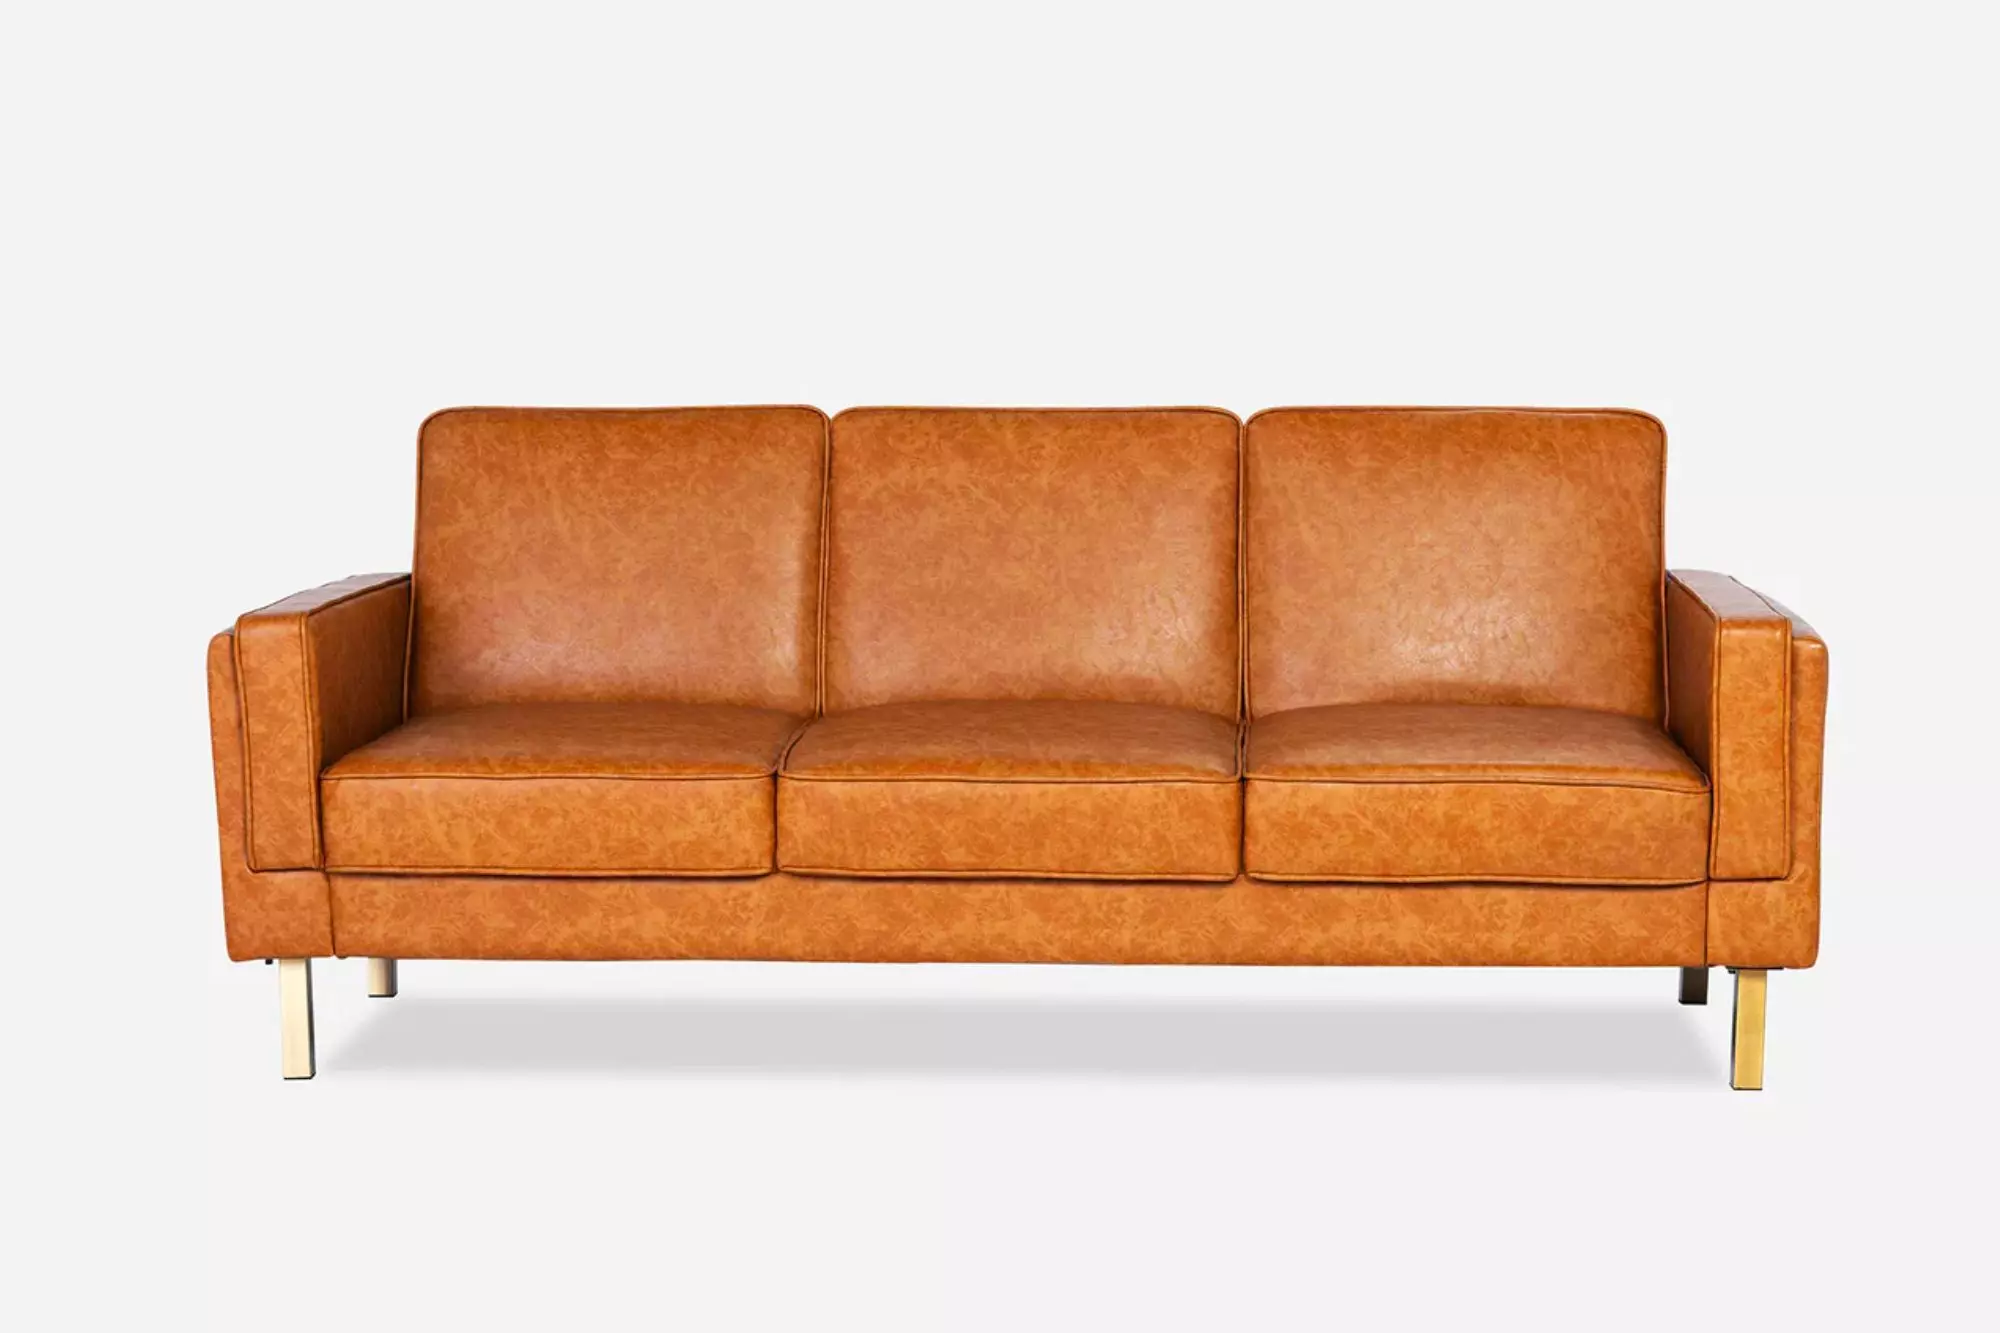 A brown faux leather couch